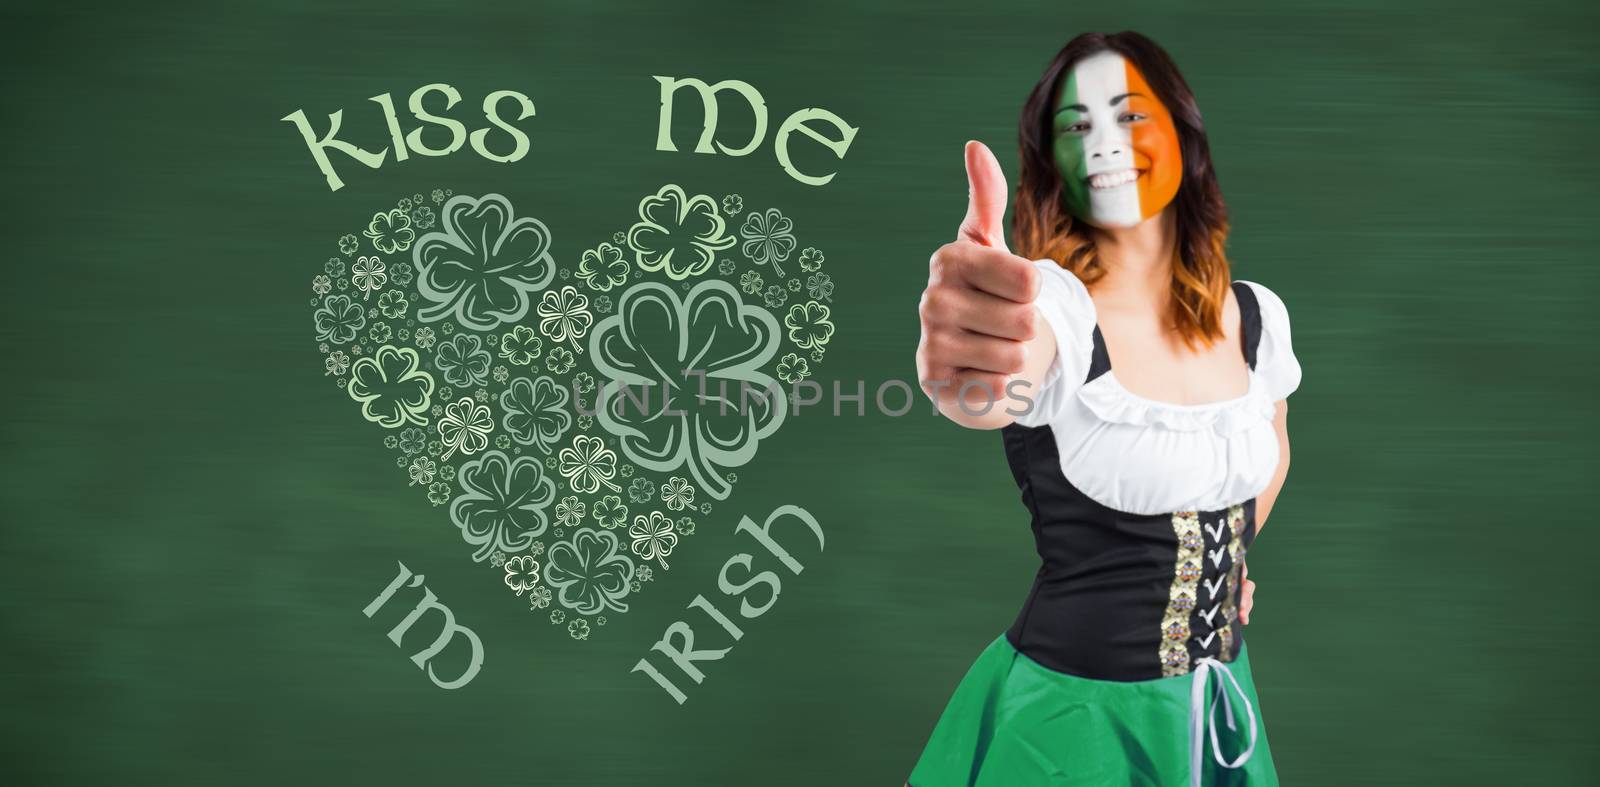 Composite image of irish girl showing thumbs up by Wavebreakmedia